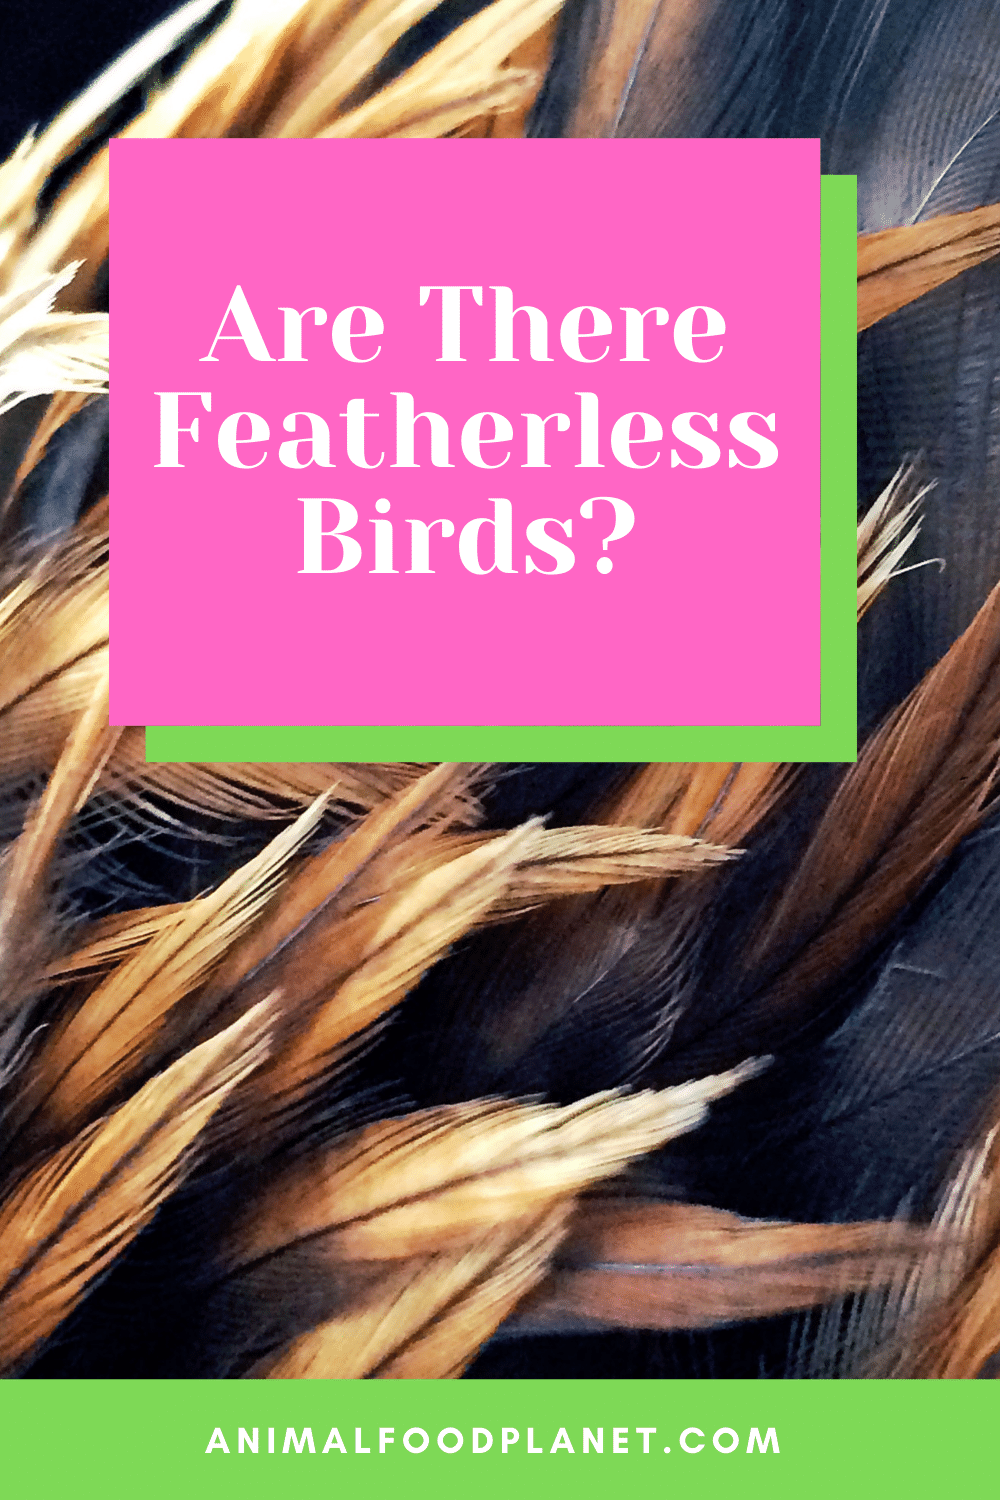 Are There Featherless Birds?